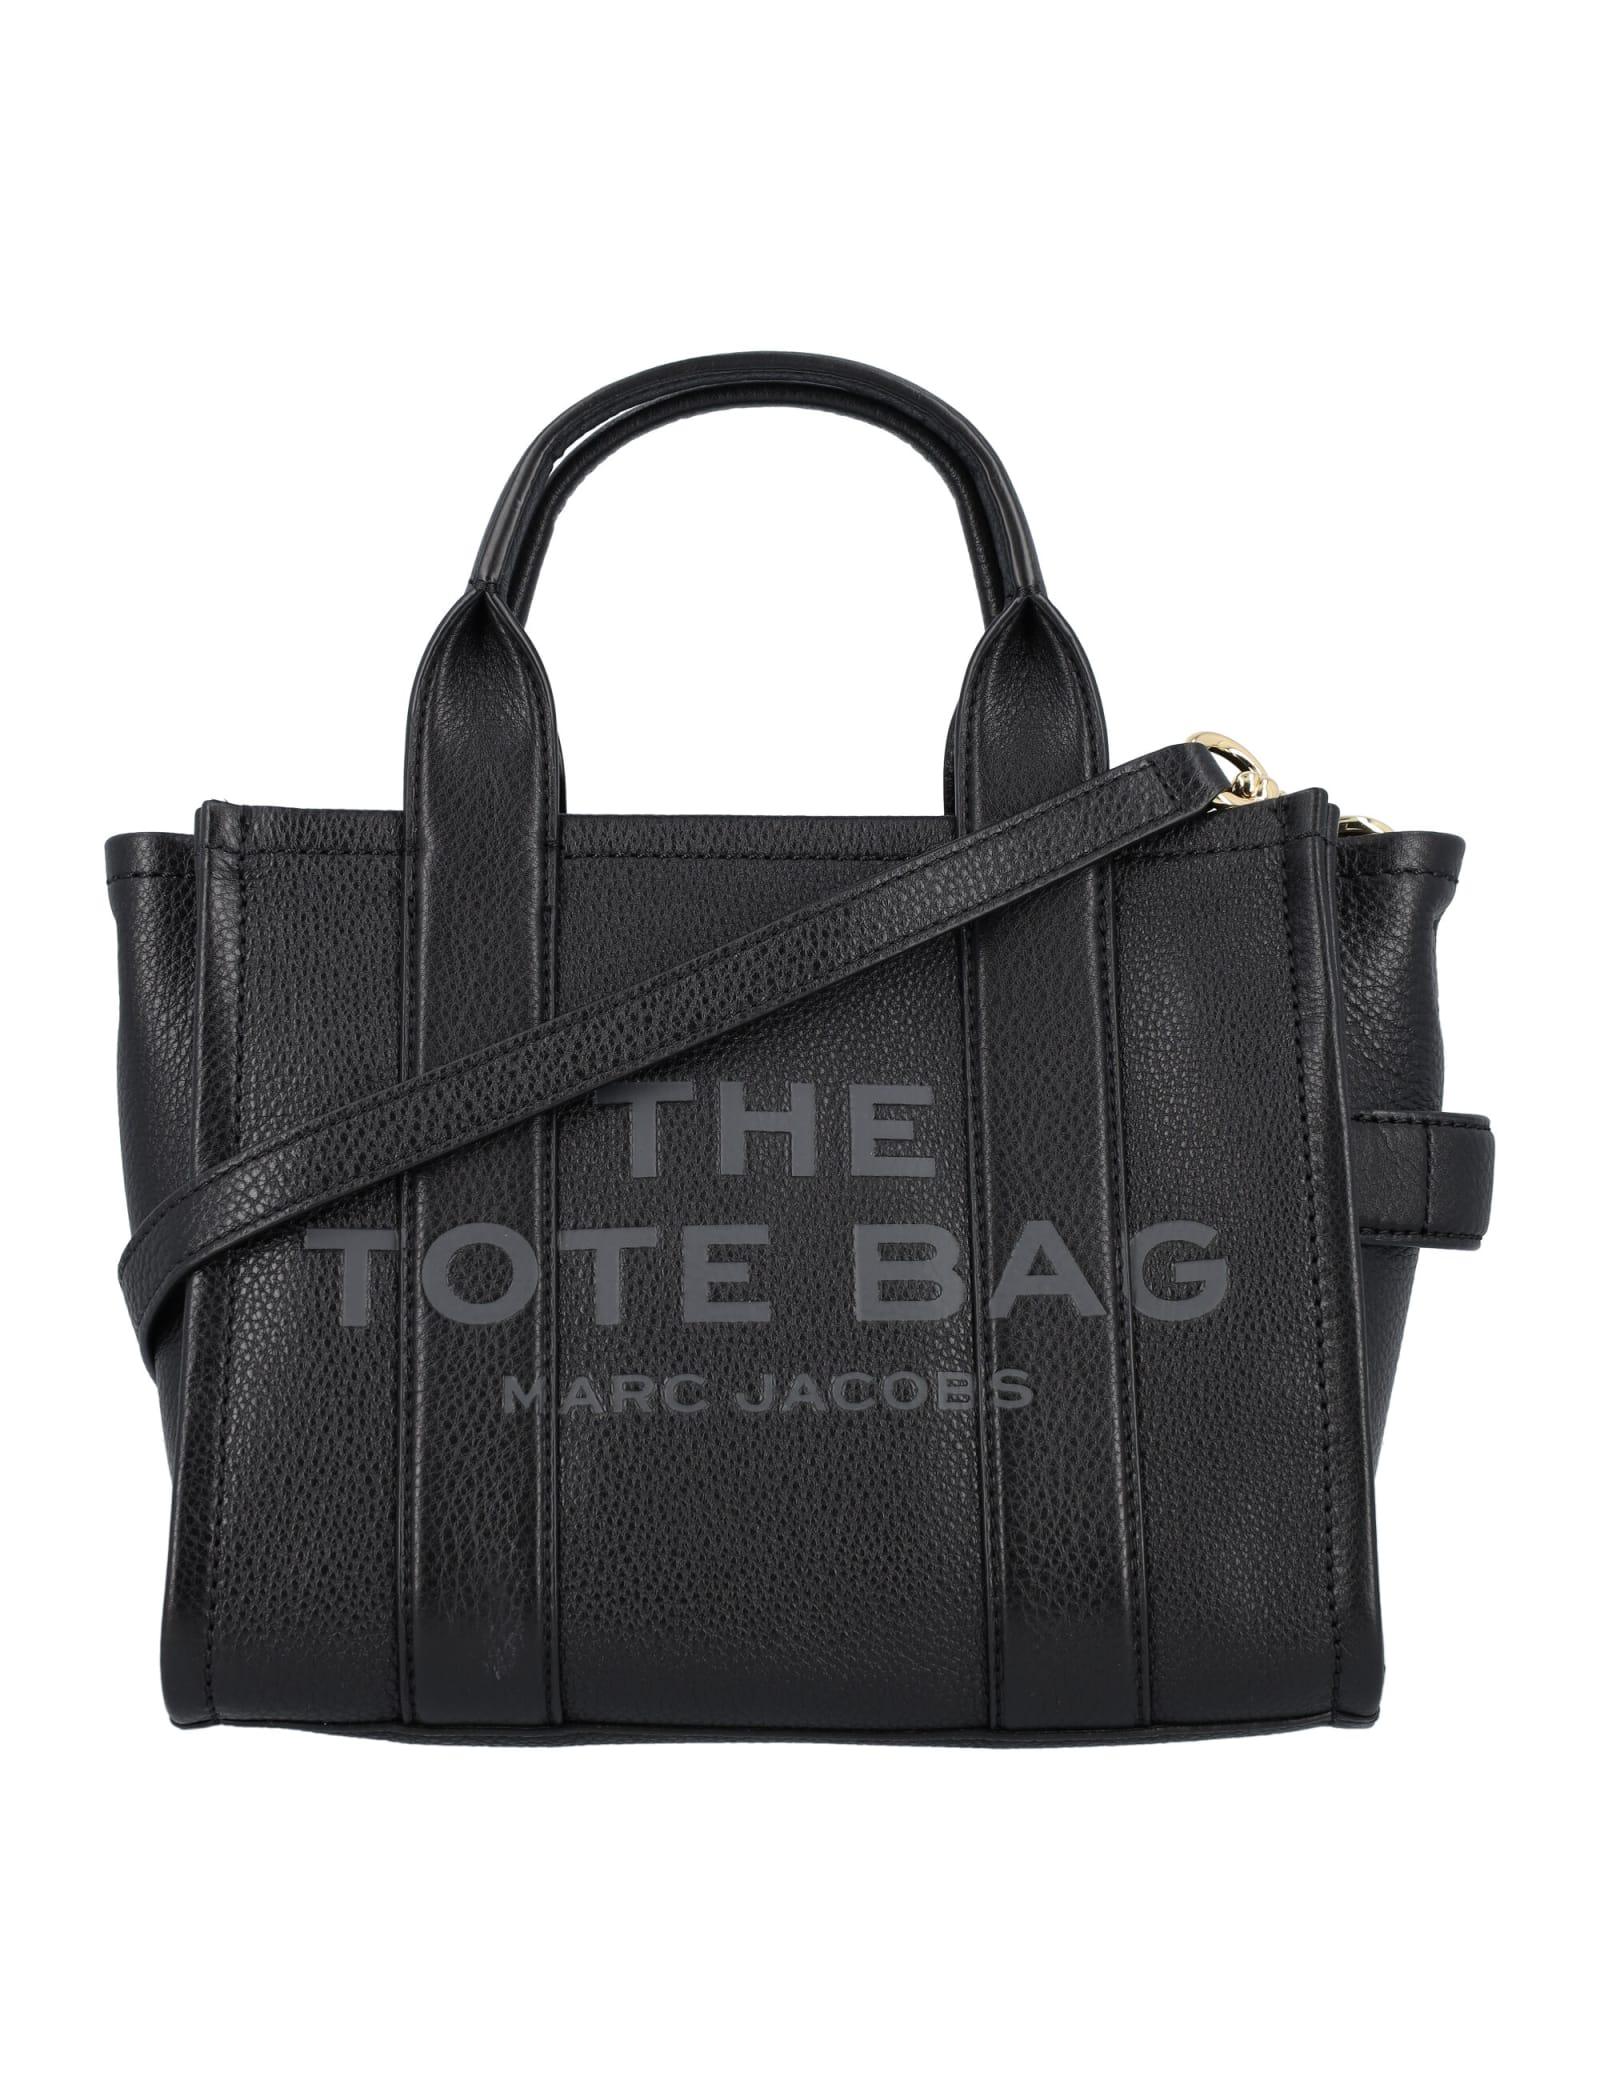 Marc Jacobs The Leather Mini Tote Bag in Black